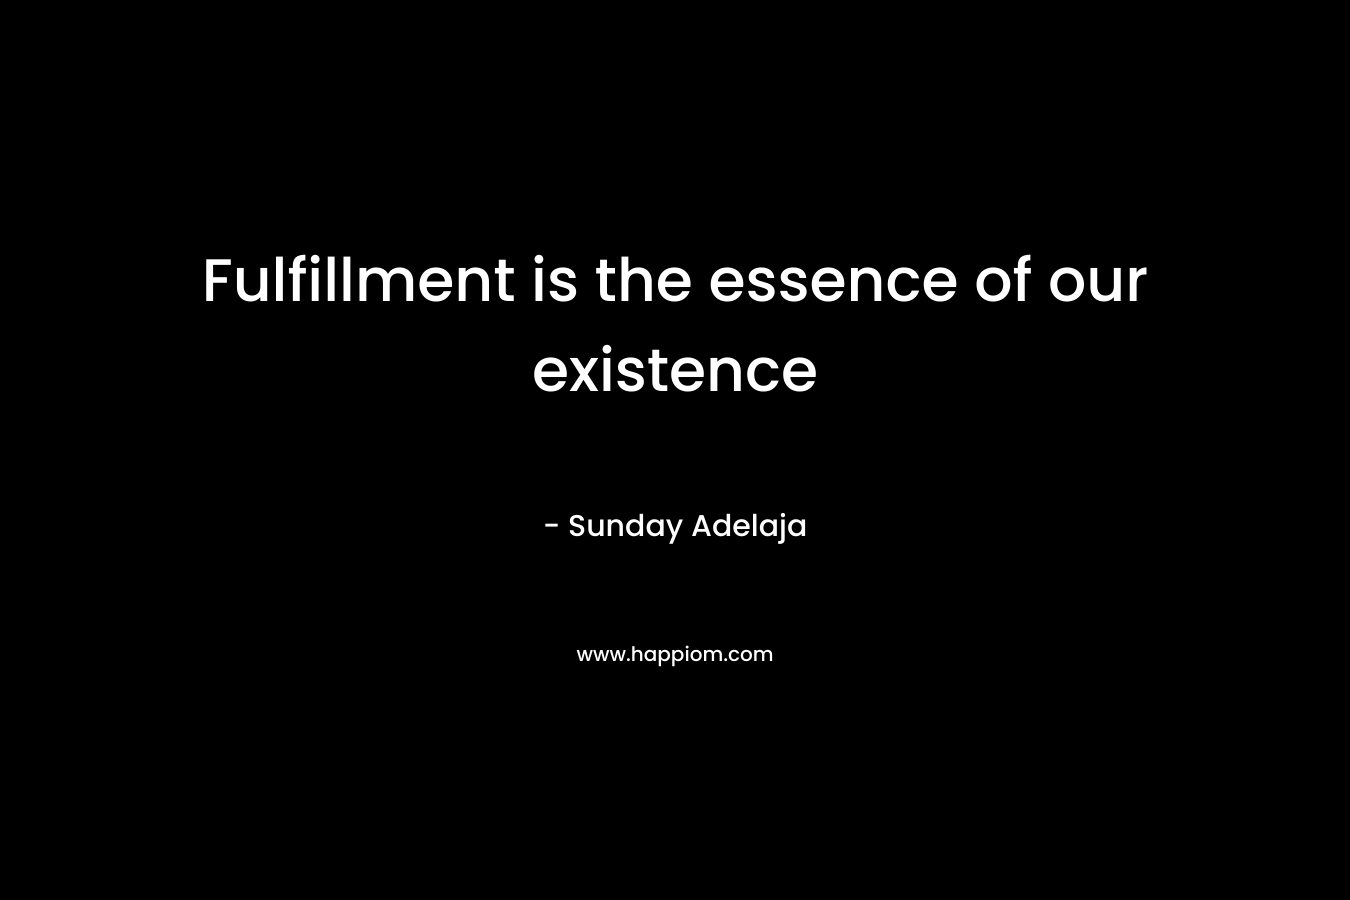 Fulfillment is the essence of our existence